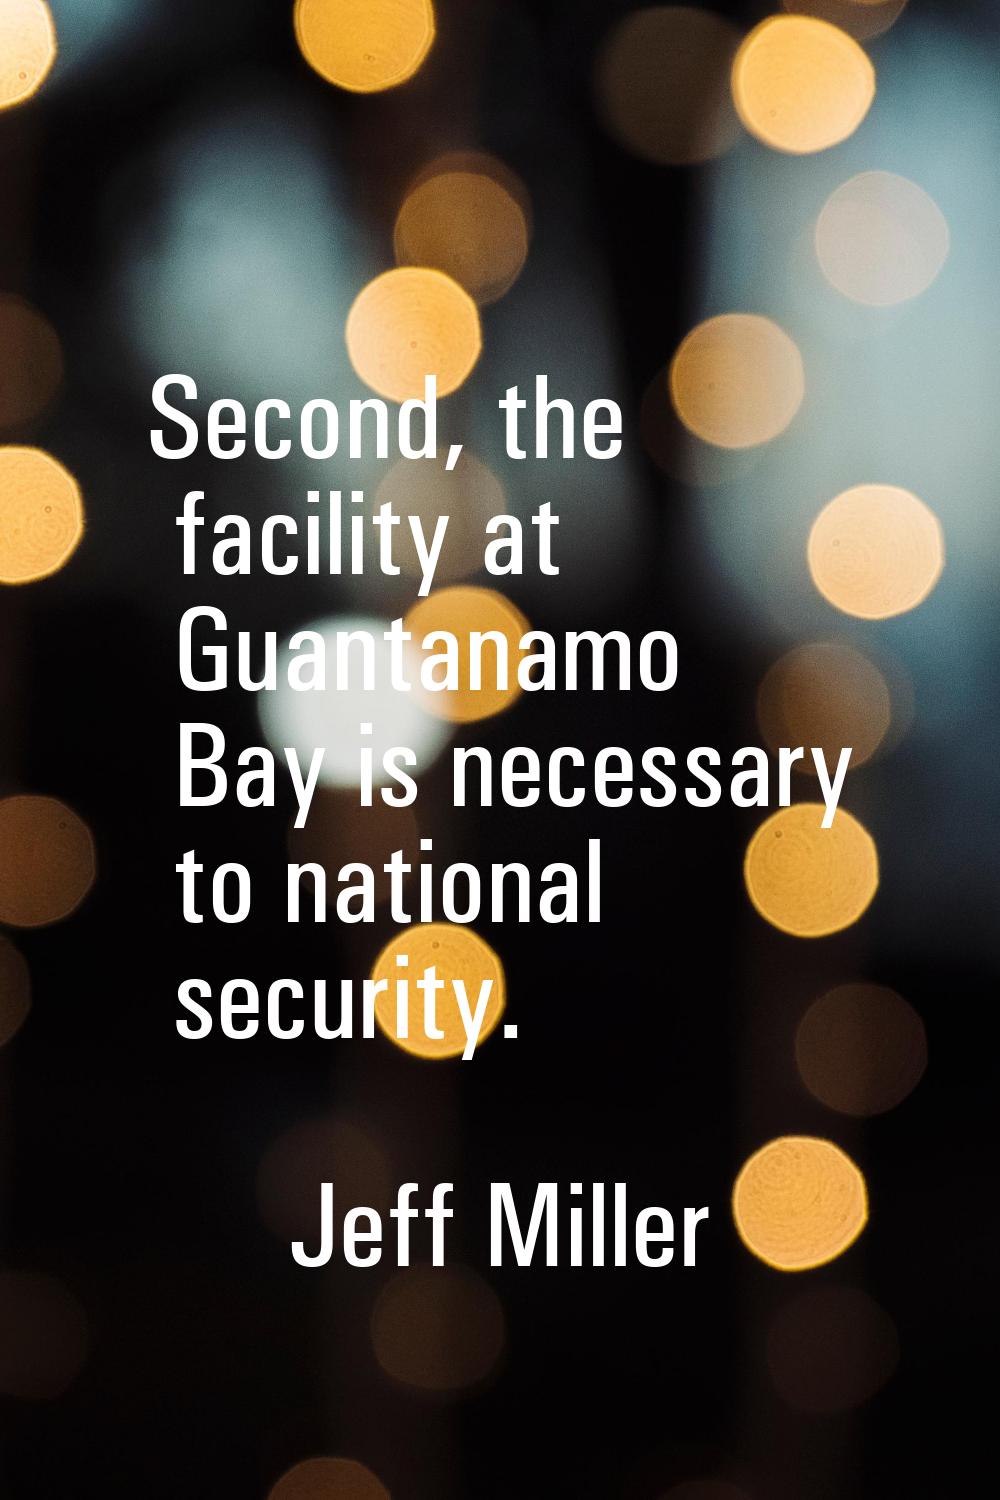 Second, the facility at Guantanamo Bay is necessary to national security.